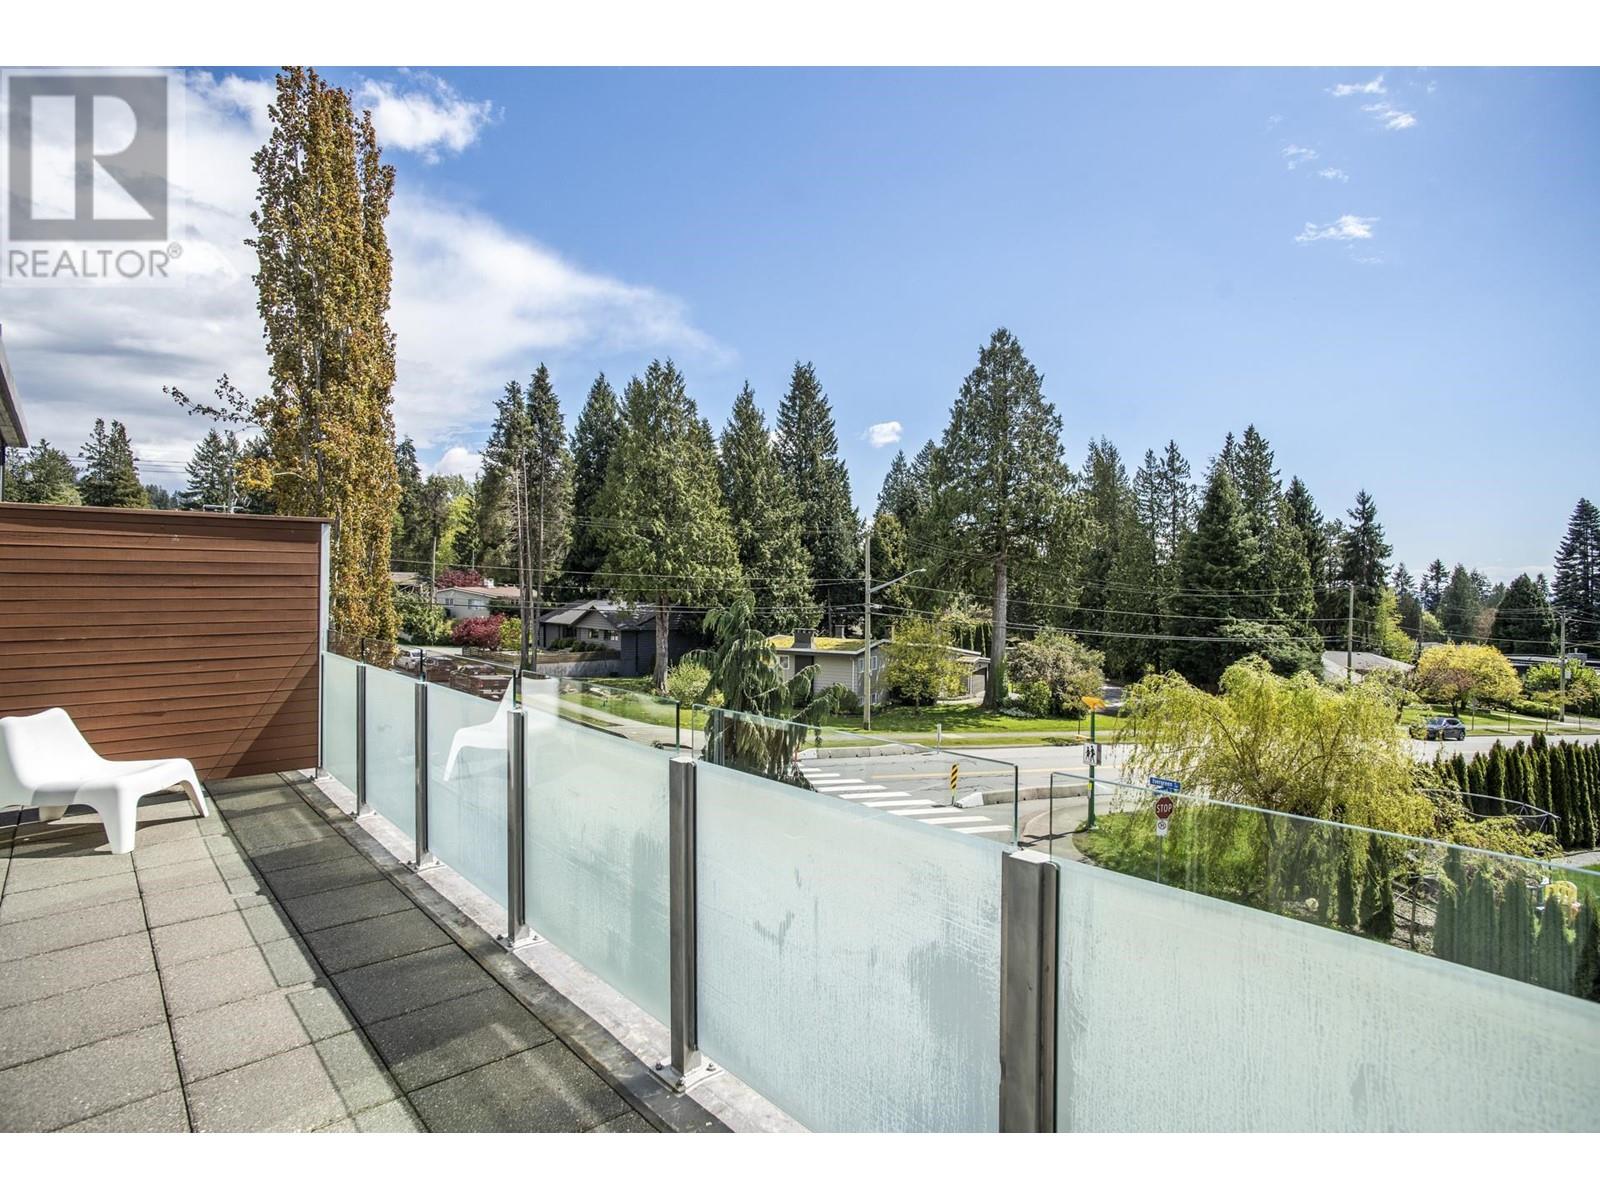 303 650 EVERGREEN PLACE, north vancouver, British Columbia